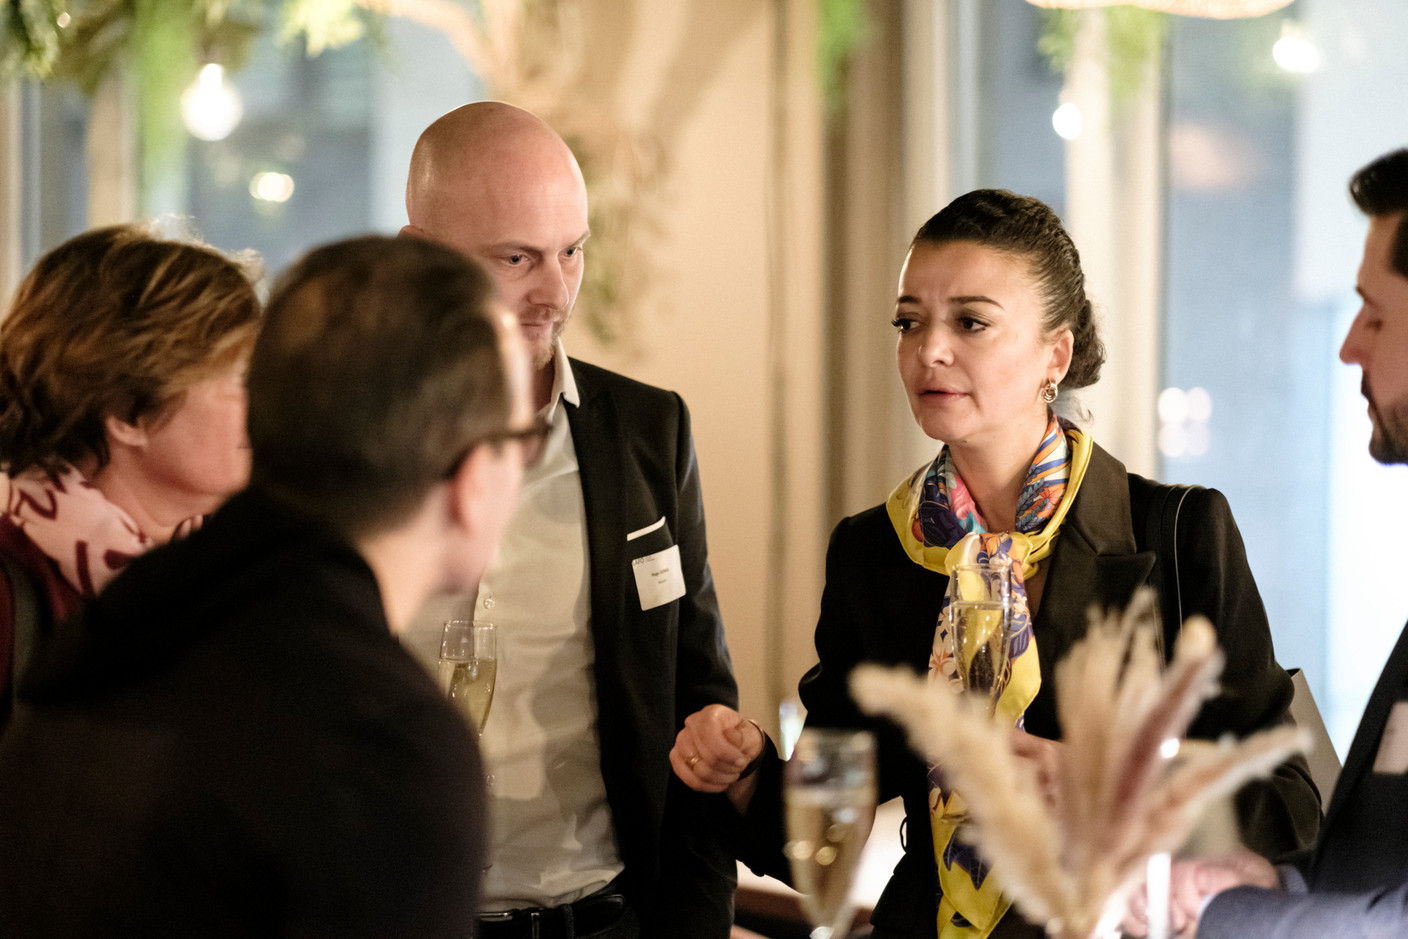 Hugo Dumas (Mazars) and Yasmine Doss Bennani (Credit Suisse) at the Luxembourg Association of Family Offices (LAFO) winter 2023 cocktail, which took place on 8 February 2023 at Hertz PopUp. Photo: Jan Hanrion for LAFO